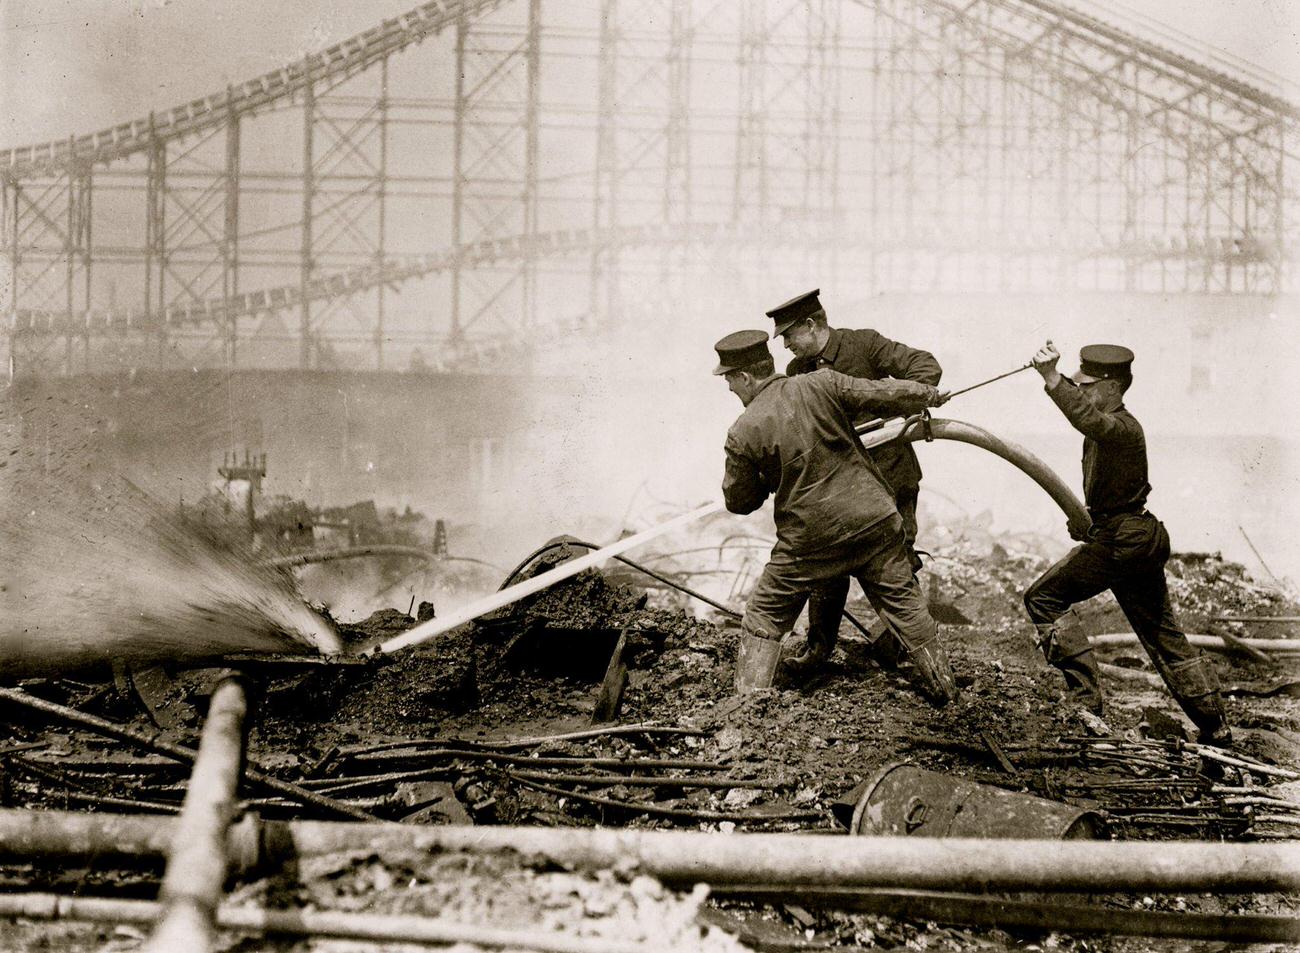 Aftermath Of The Dreamland Fire, Firefighters Work, May 1911.